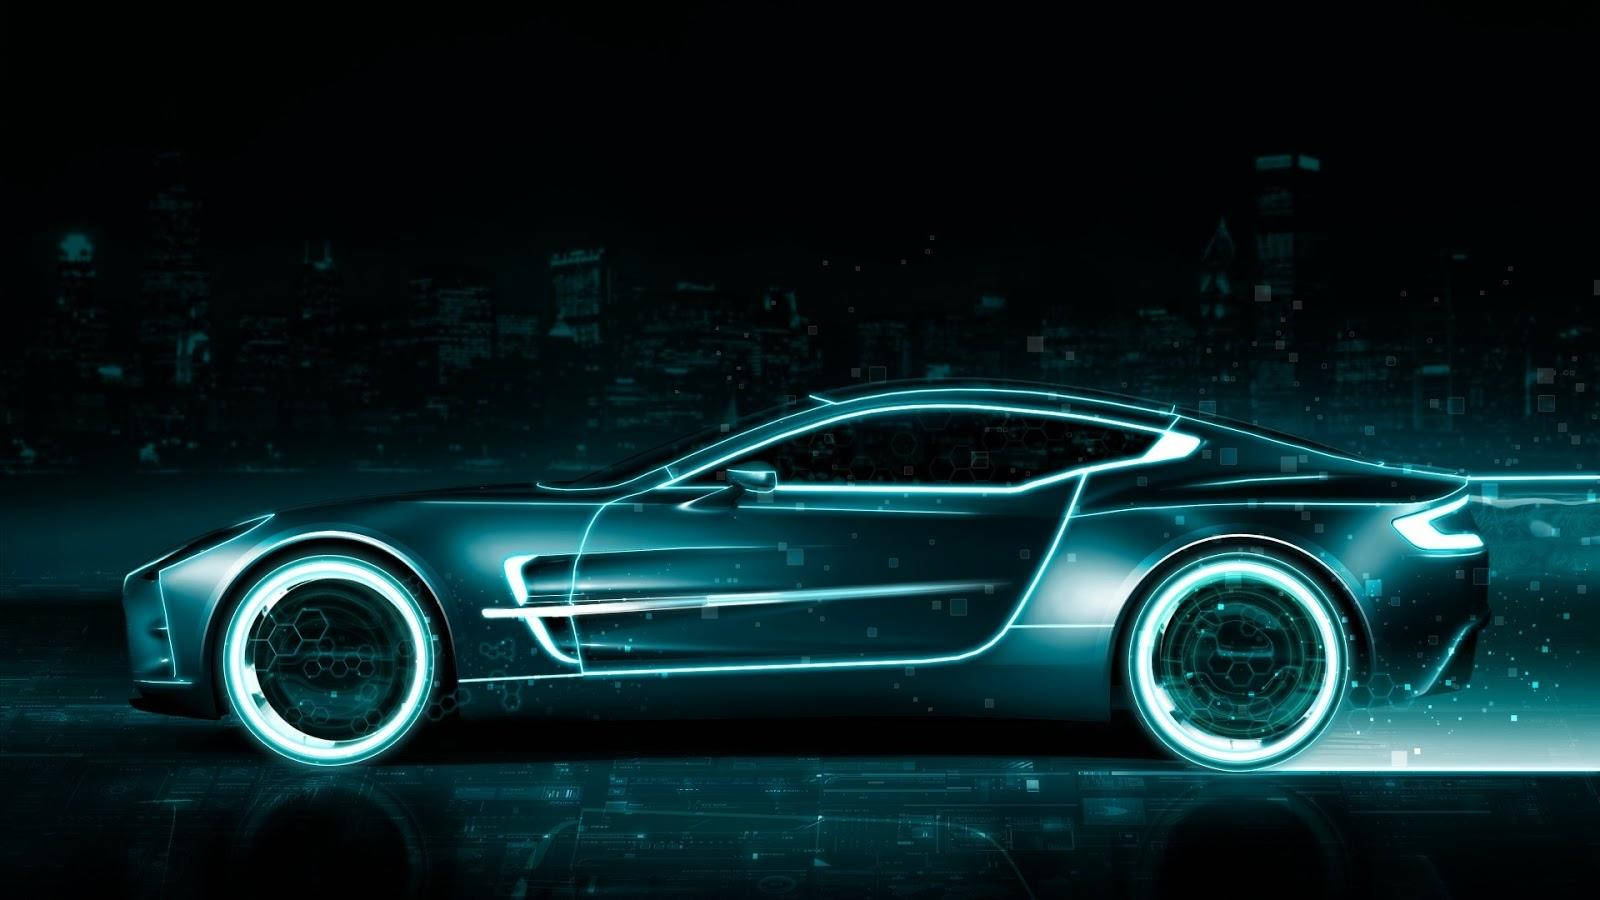 A Futuristic Car With A Neon Light On It Wallpaper